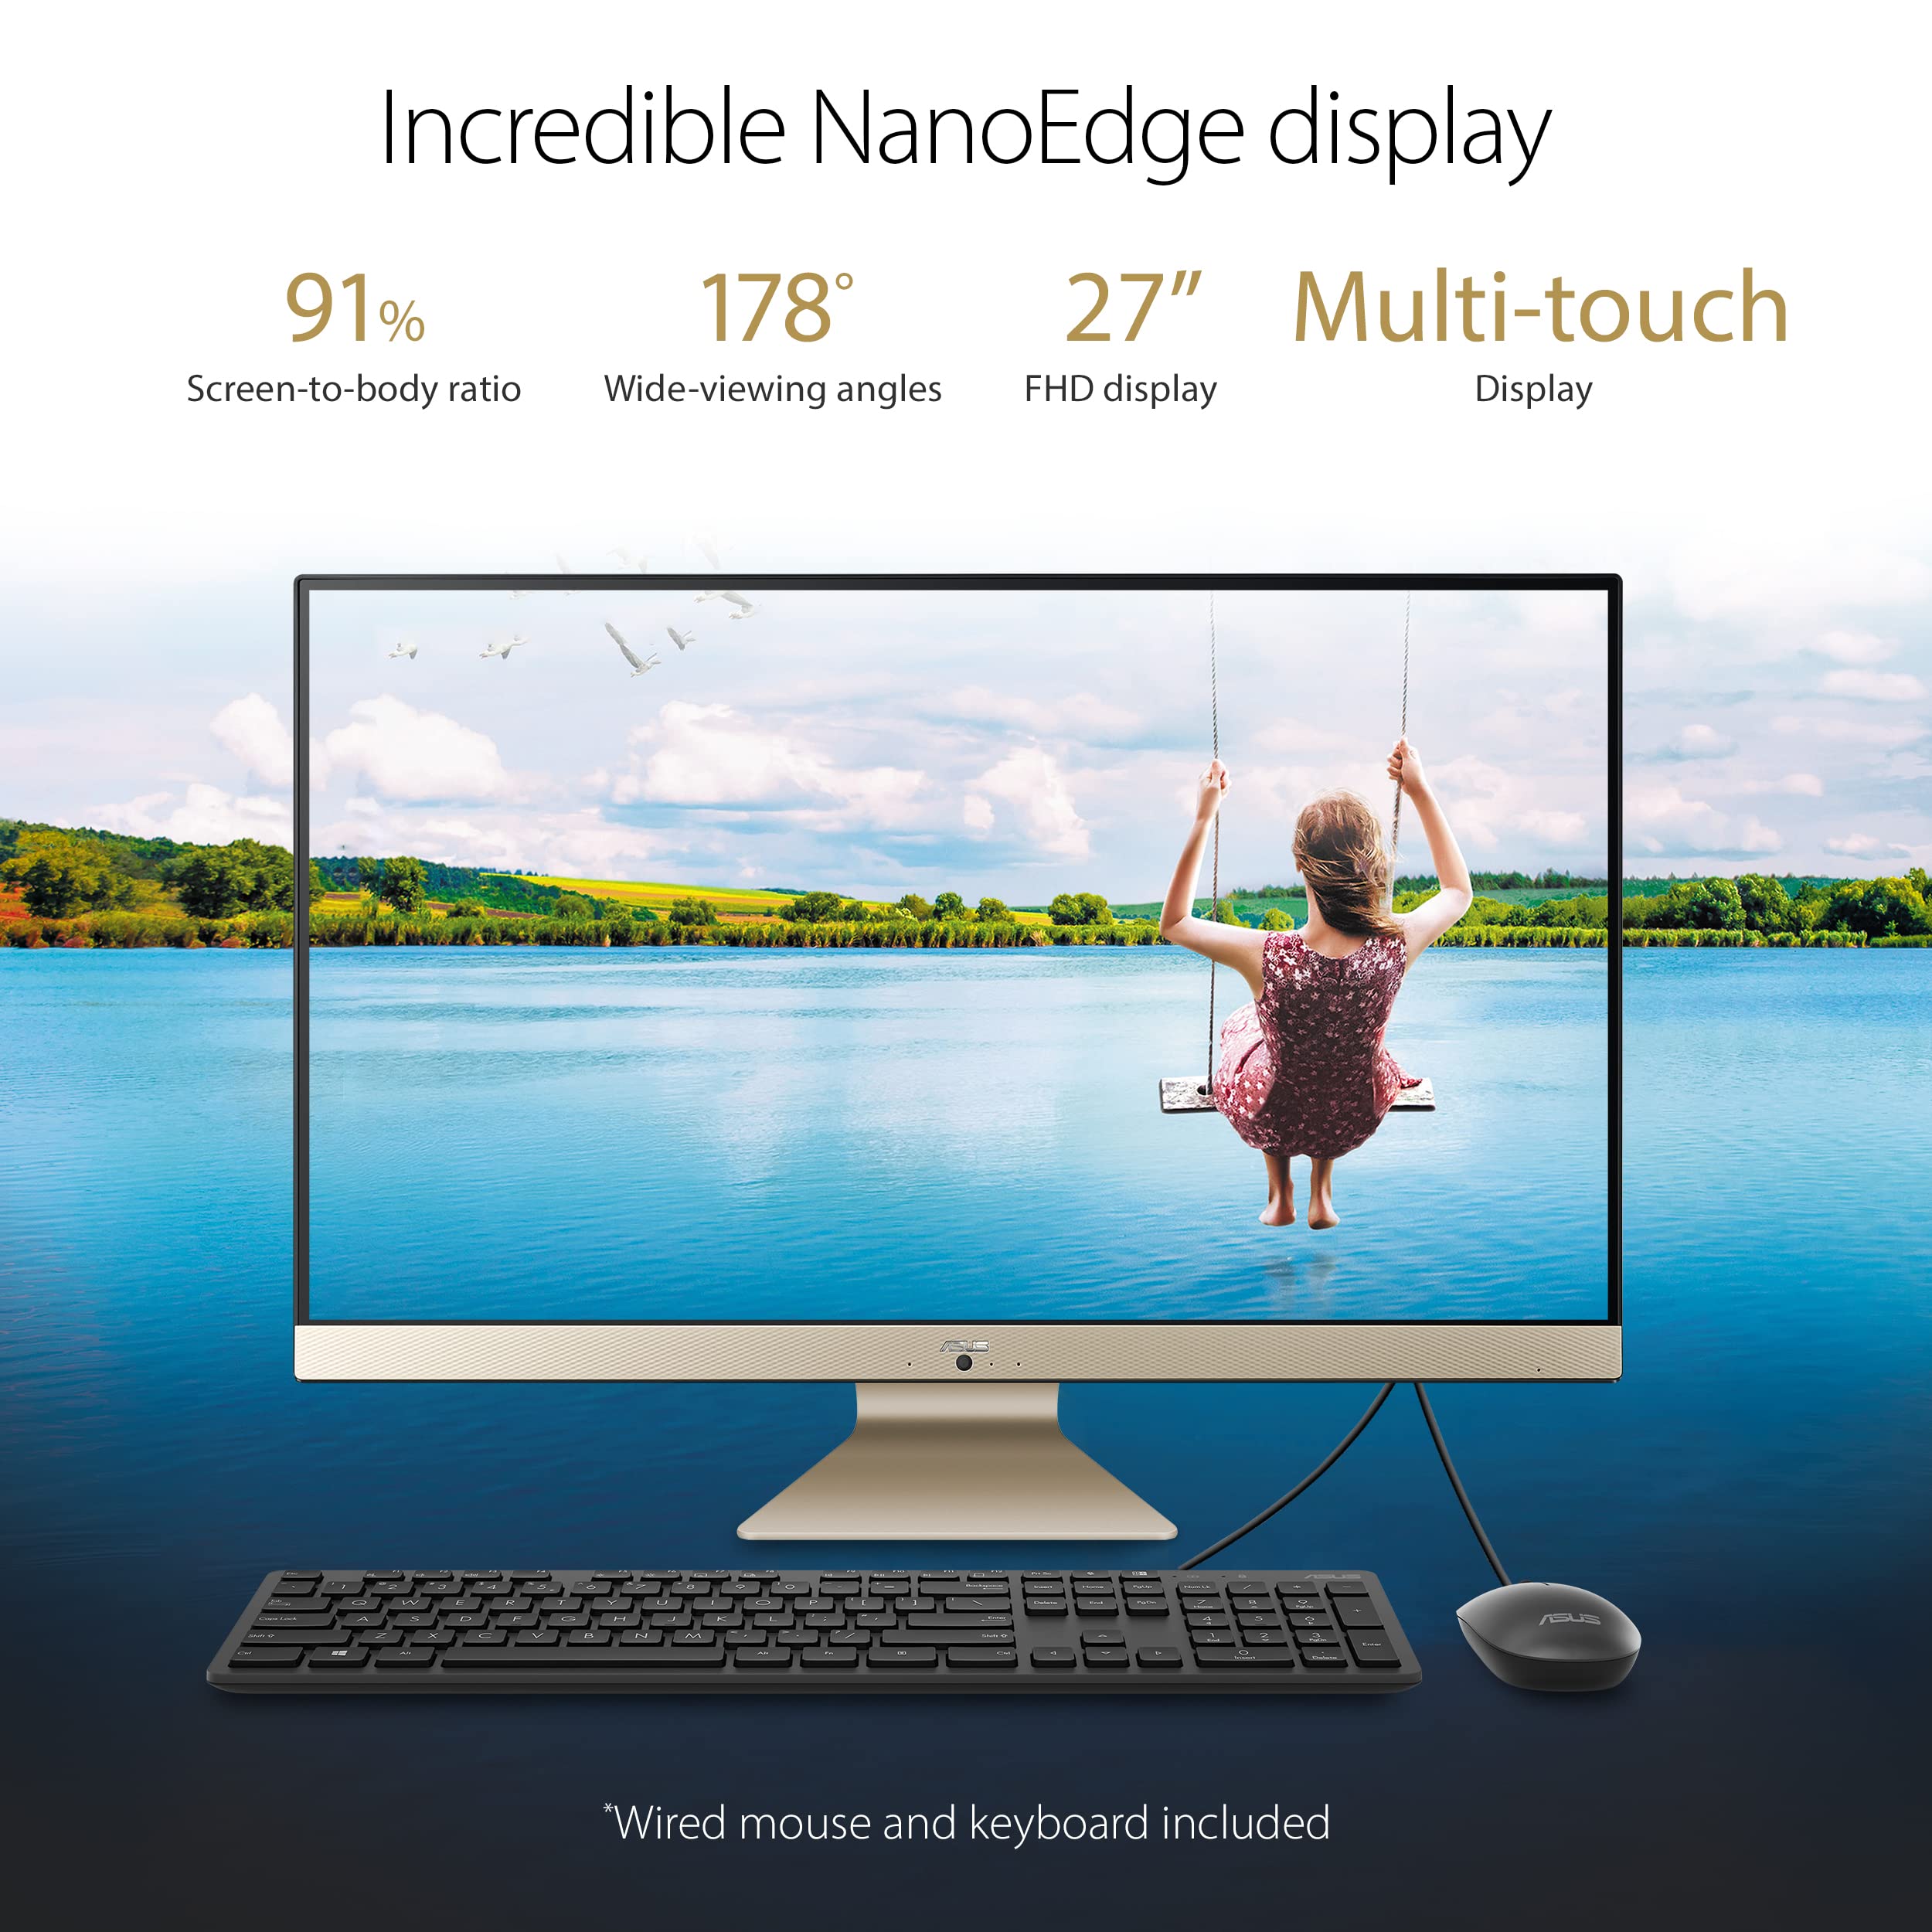 ASUS AiO 27” All-in-One Desktop Computer, AMD Ryan 7 5700U, 27” LED-Backlit Touchscreen Display with NanoEdge Bezel, 16GB DDR4 RAM, 512GB PCIe SSD, Wired Keyboard and Mouse, Black, Windows 11 Home